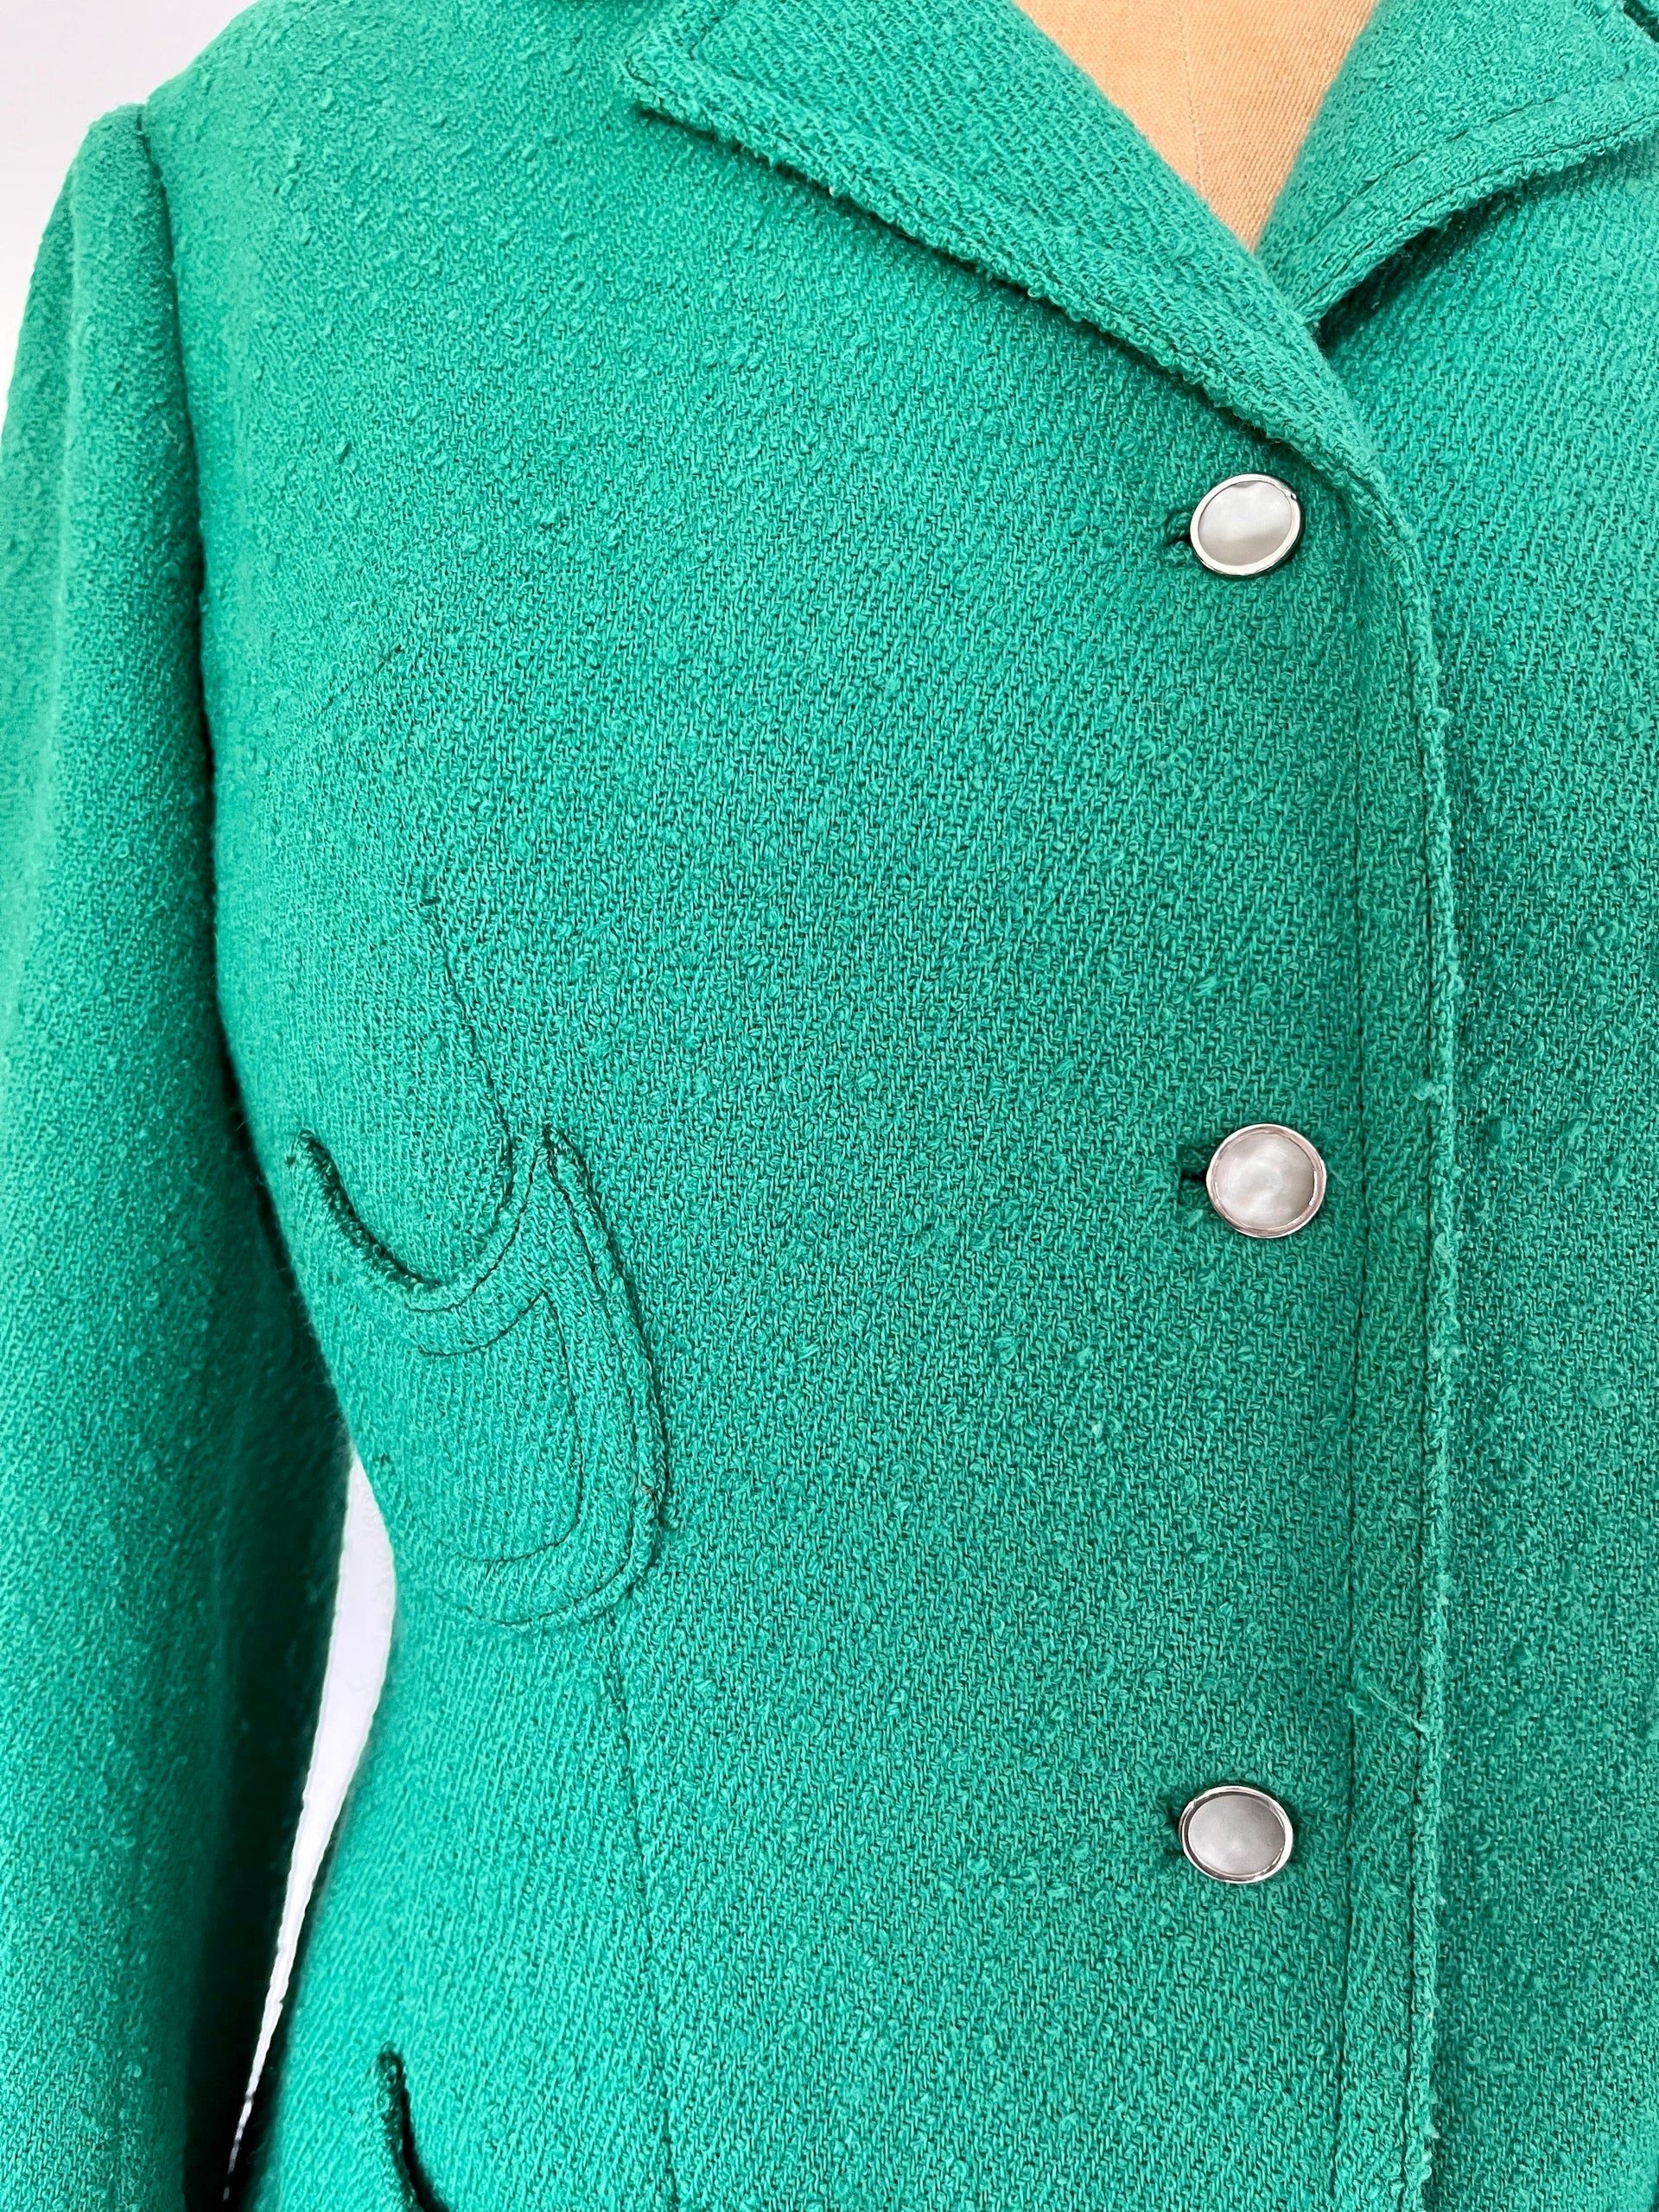 1960s Short Green Wool Blazer Made in France//Size M/L